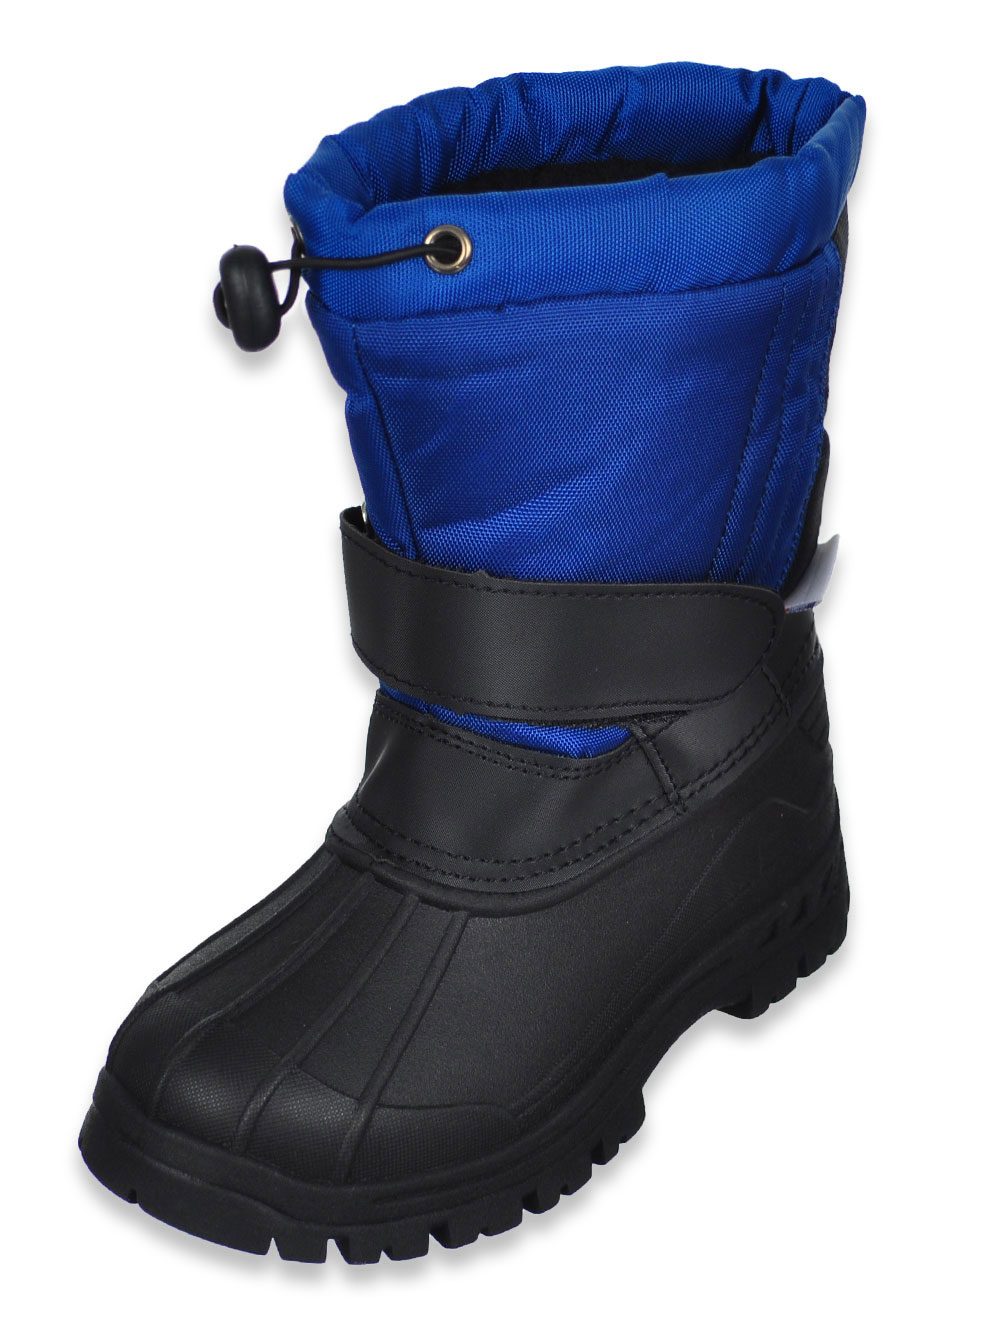 Ice20 Boys' Winter Boots by ICE20 in 